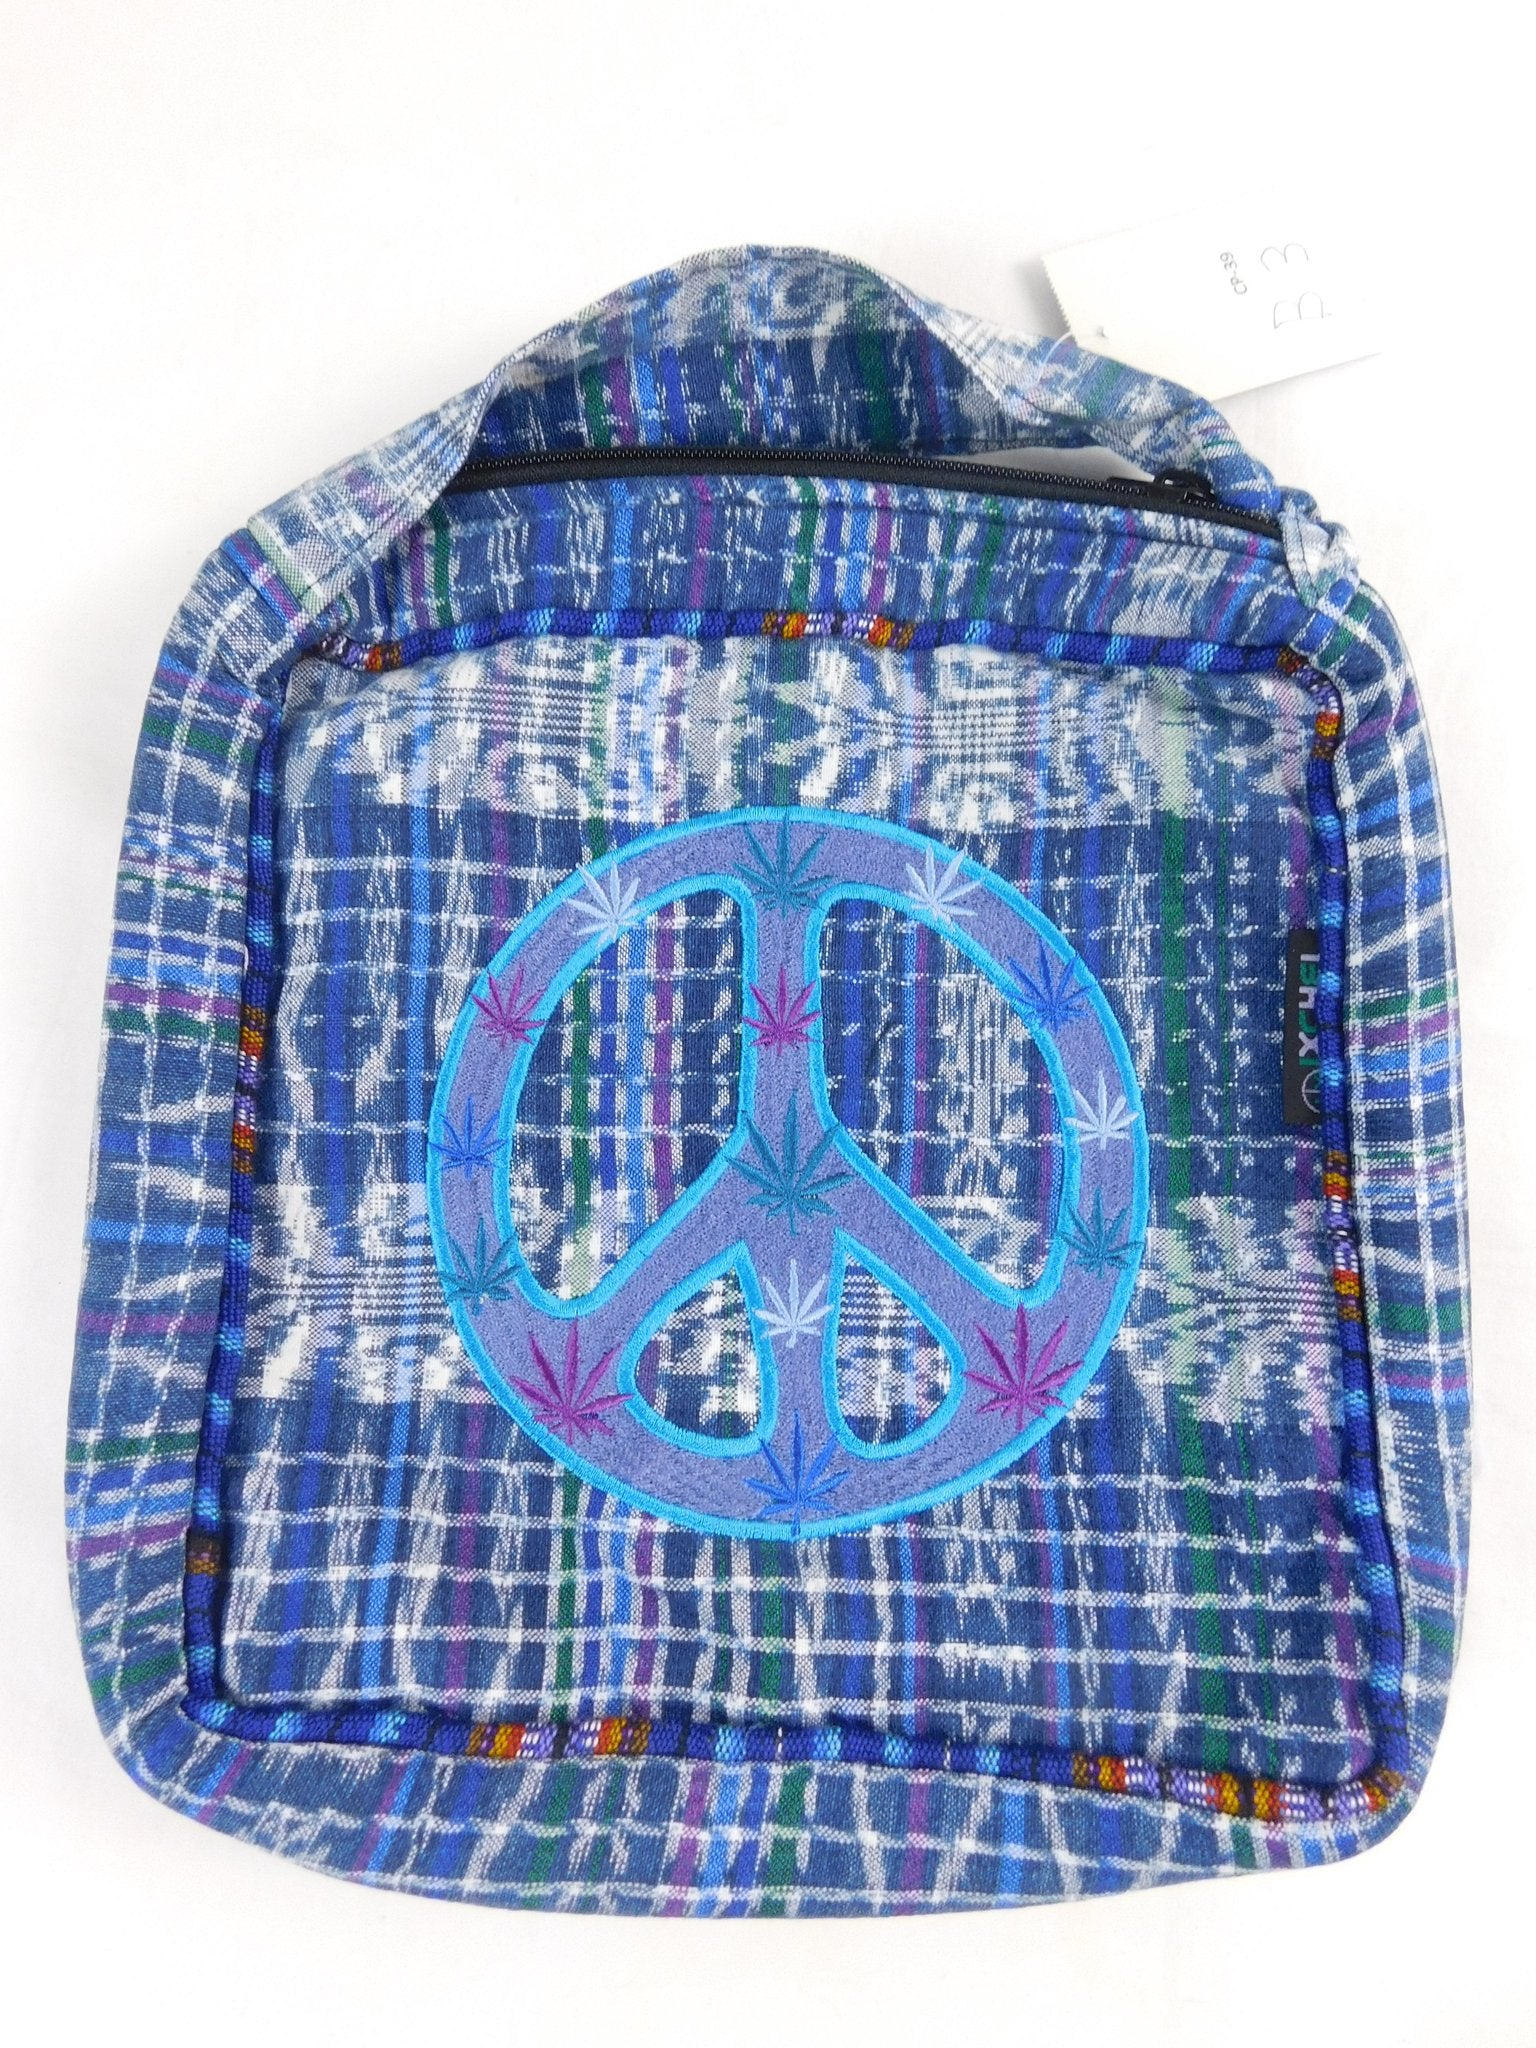 Hand Woven Ikat Embroidered Leaf & Peace Bag